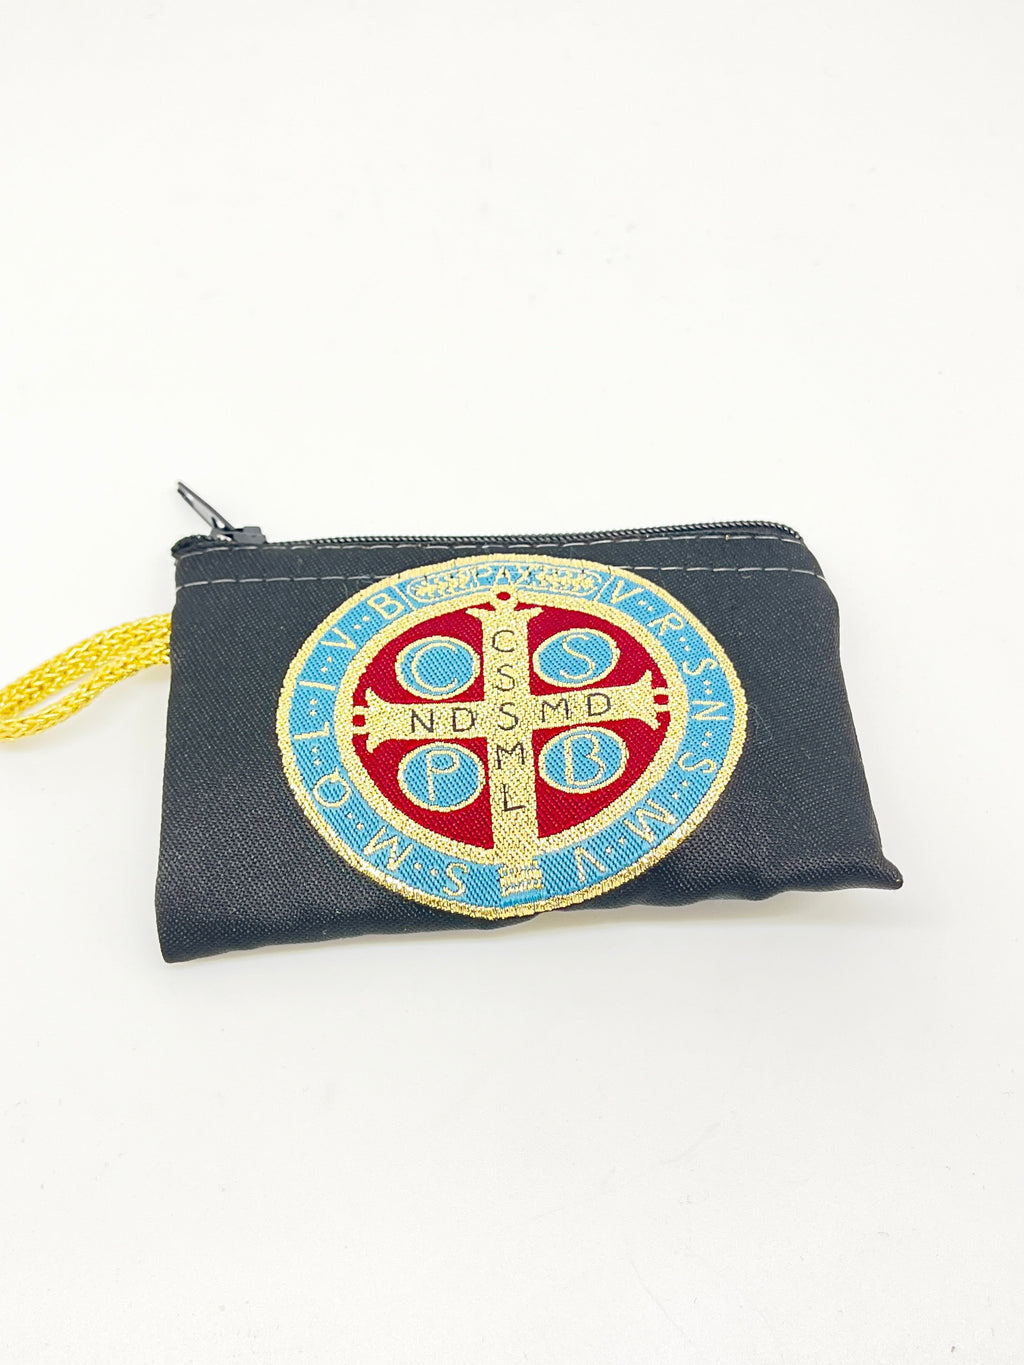 Saint Benedict Woven Tapestry Rosary Pouch Large 5 1/2" - Unique Catholic Gifts